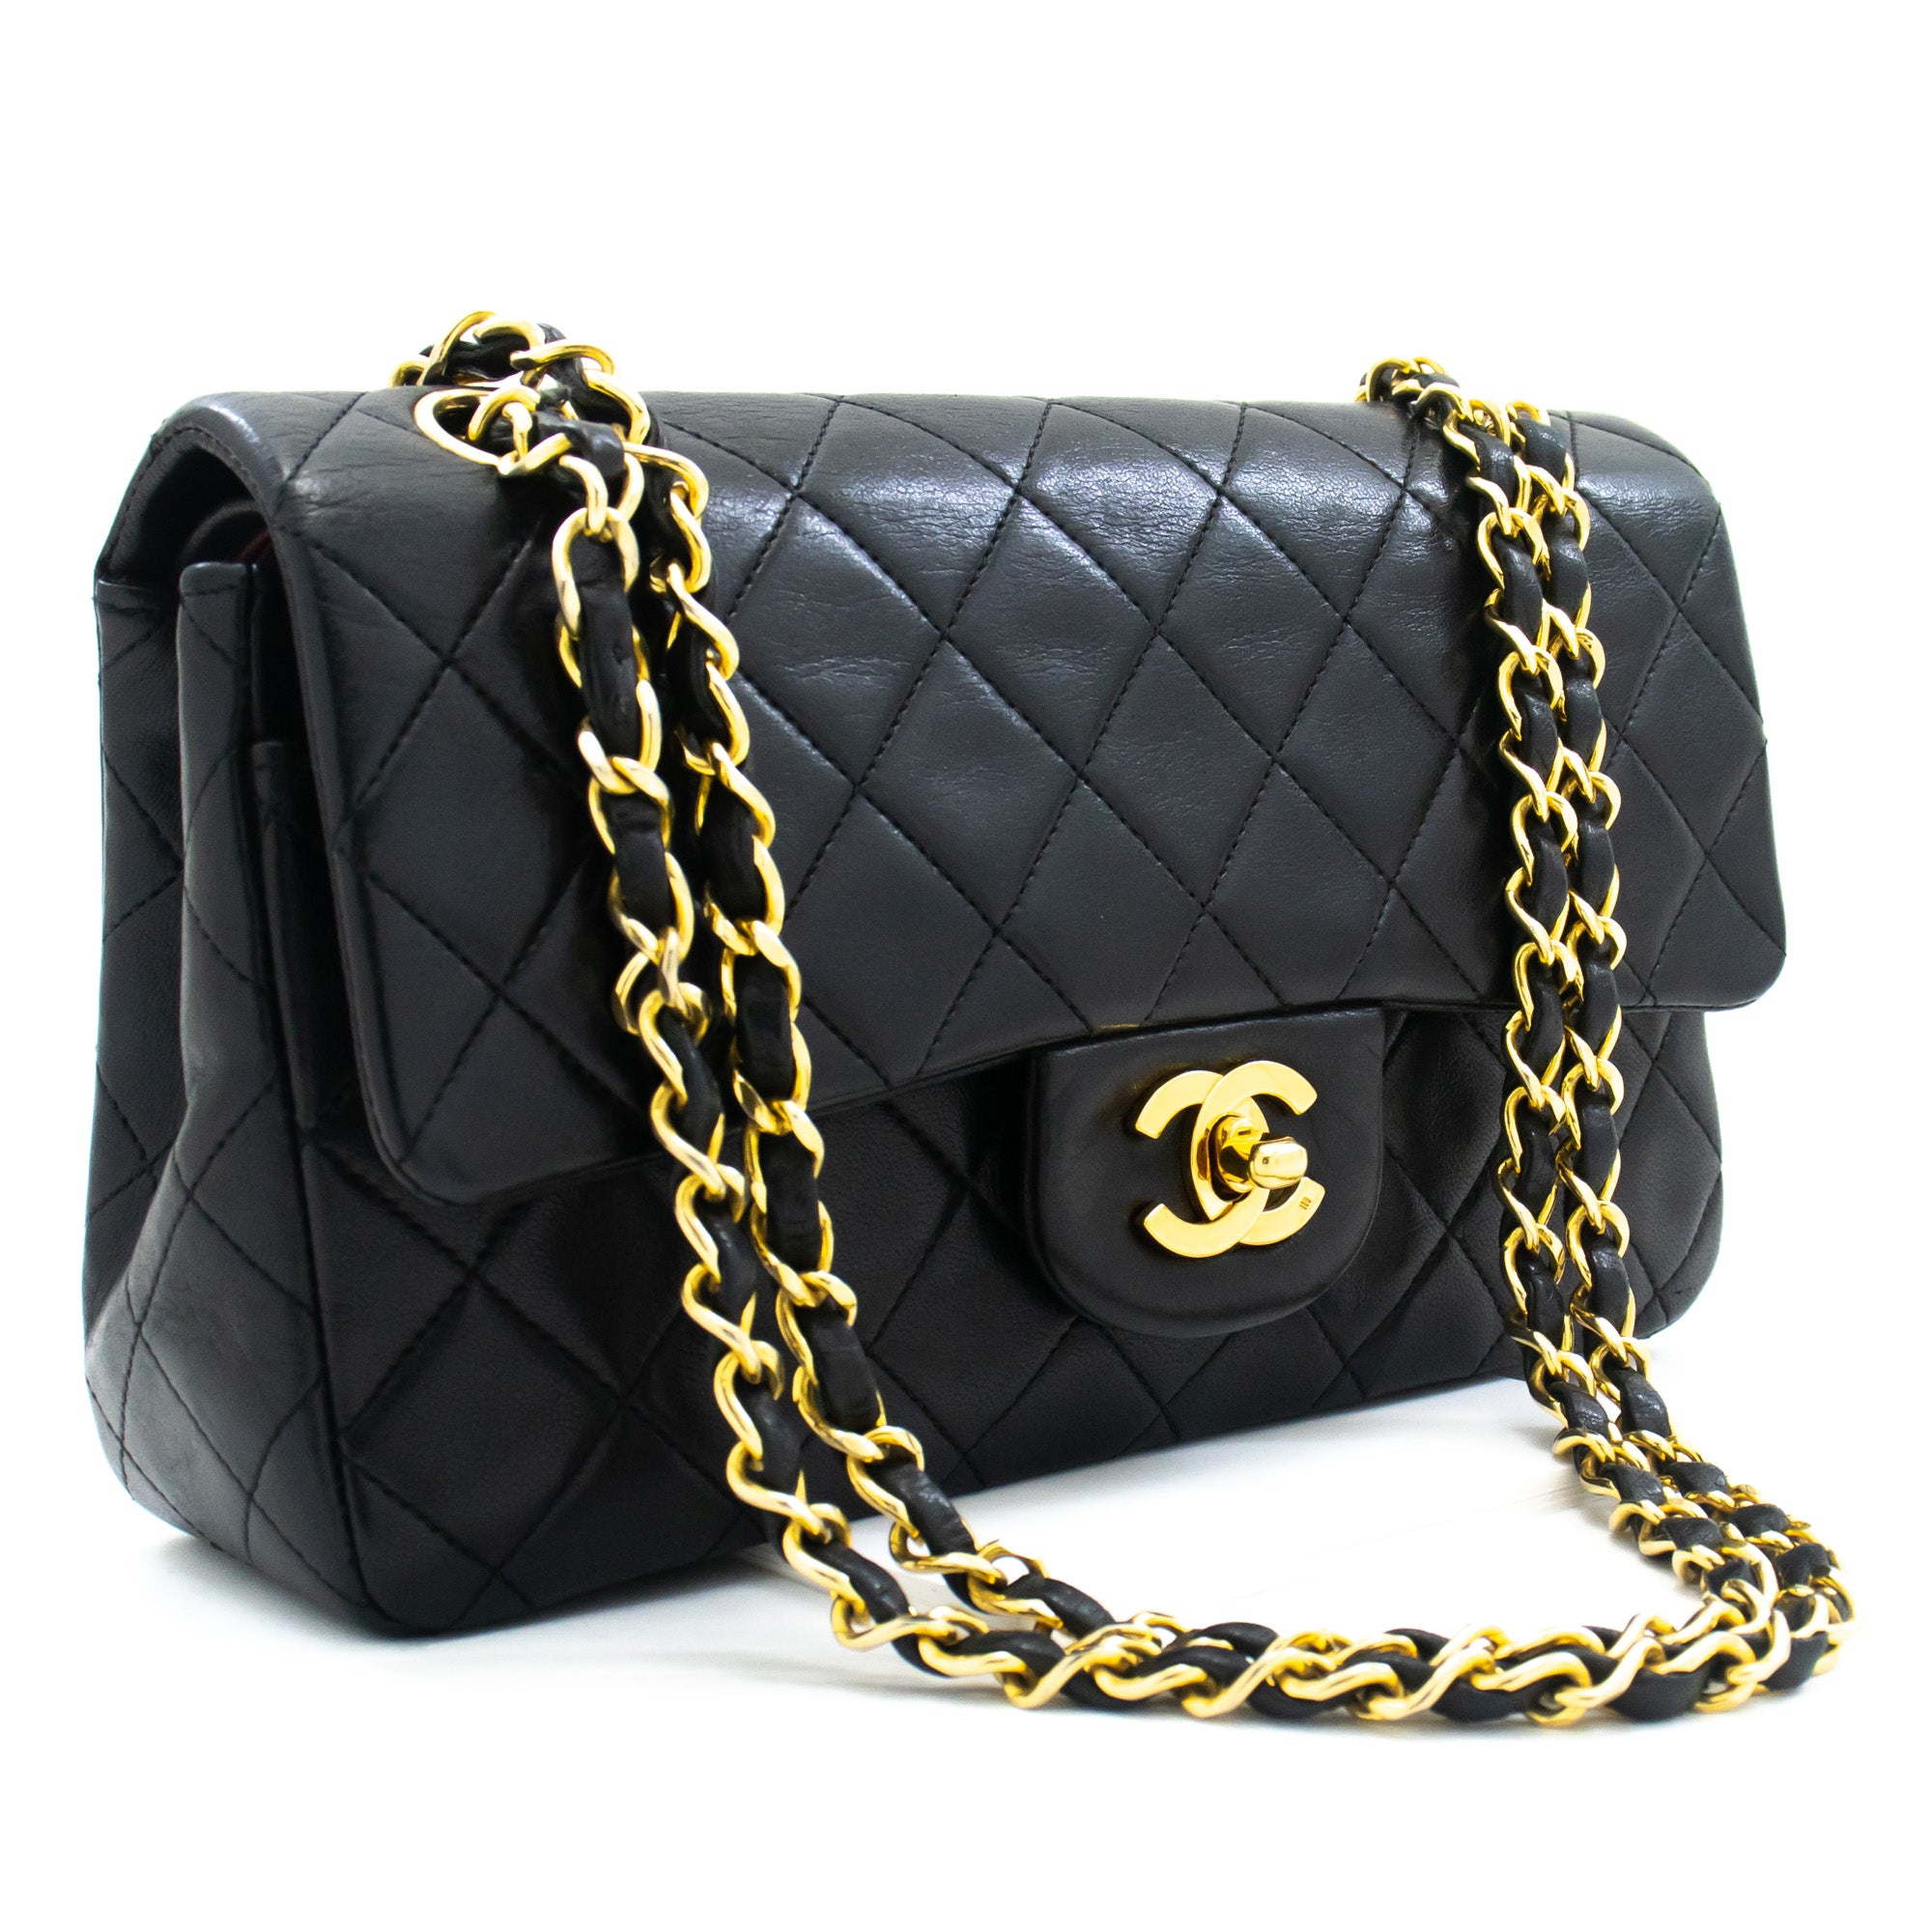 Chanel Vintage Chanel 2.55 9 Double Flap Black Quilted Leather